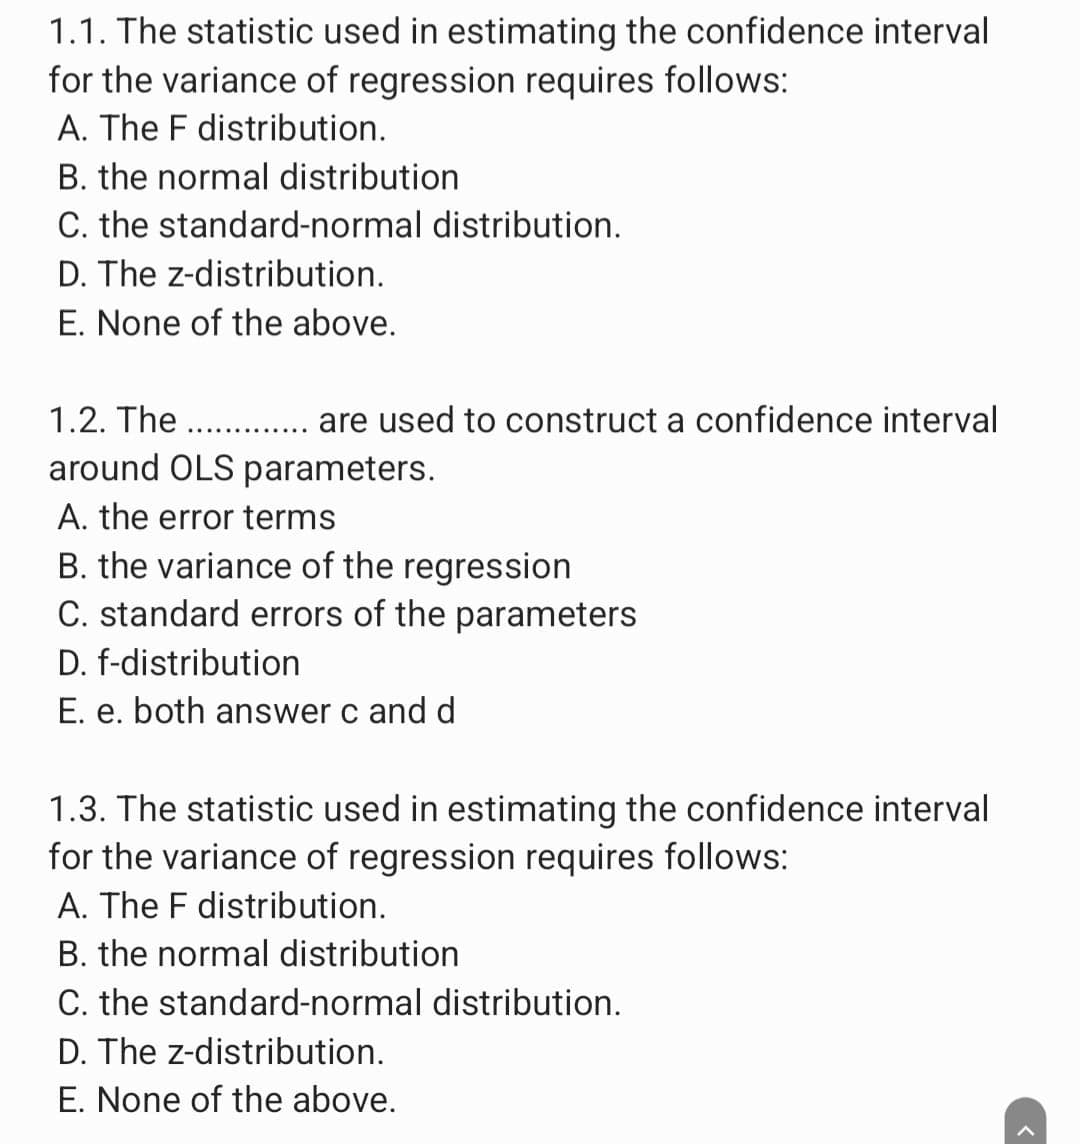 1.1. The statistic used in estimating the confidence interval
for the variance of regression requires follows:
A. The F distribution.
B. the normal distribution
C. the standard-normal distribution.
D. The z-distribution.
E. None of the above.
1.2. The ............. are used to construct a confidence interval
around OLS parameters.
A. the error terms
B. the variance of the regression
C. standard errors of the parameters
D. f-distribution
E. e. both answer c and d
1.3. The statistic used in estimating the confidence interval
for the variance of regression requires follows:
A. The F distribution.
B. the normal distribution
C. the standard-normal distribution.
D. The z-distribution.
E. None of the above.